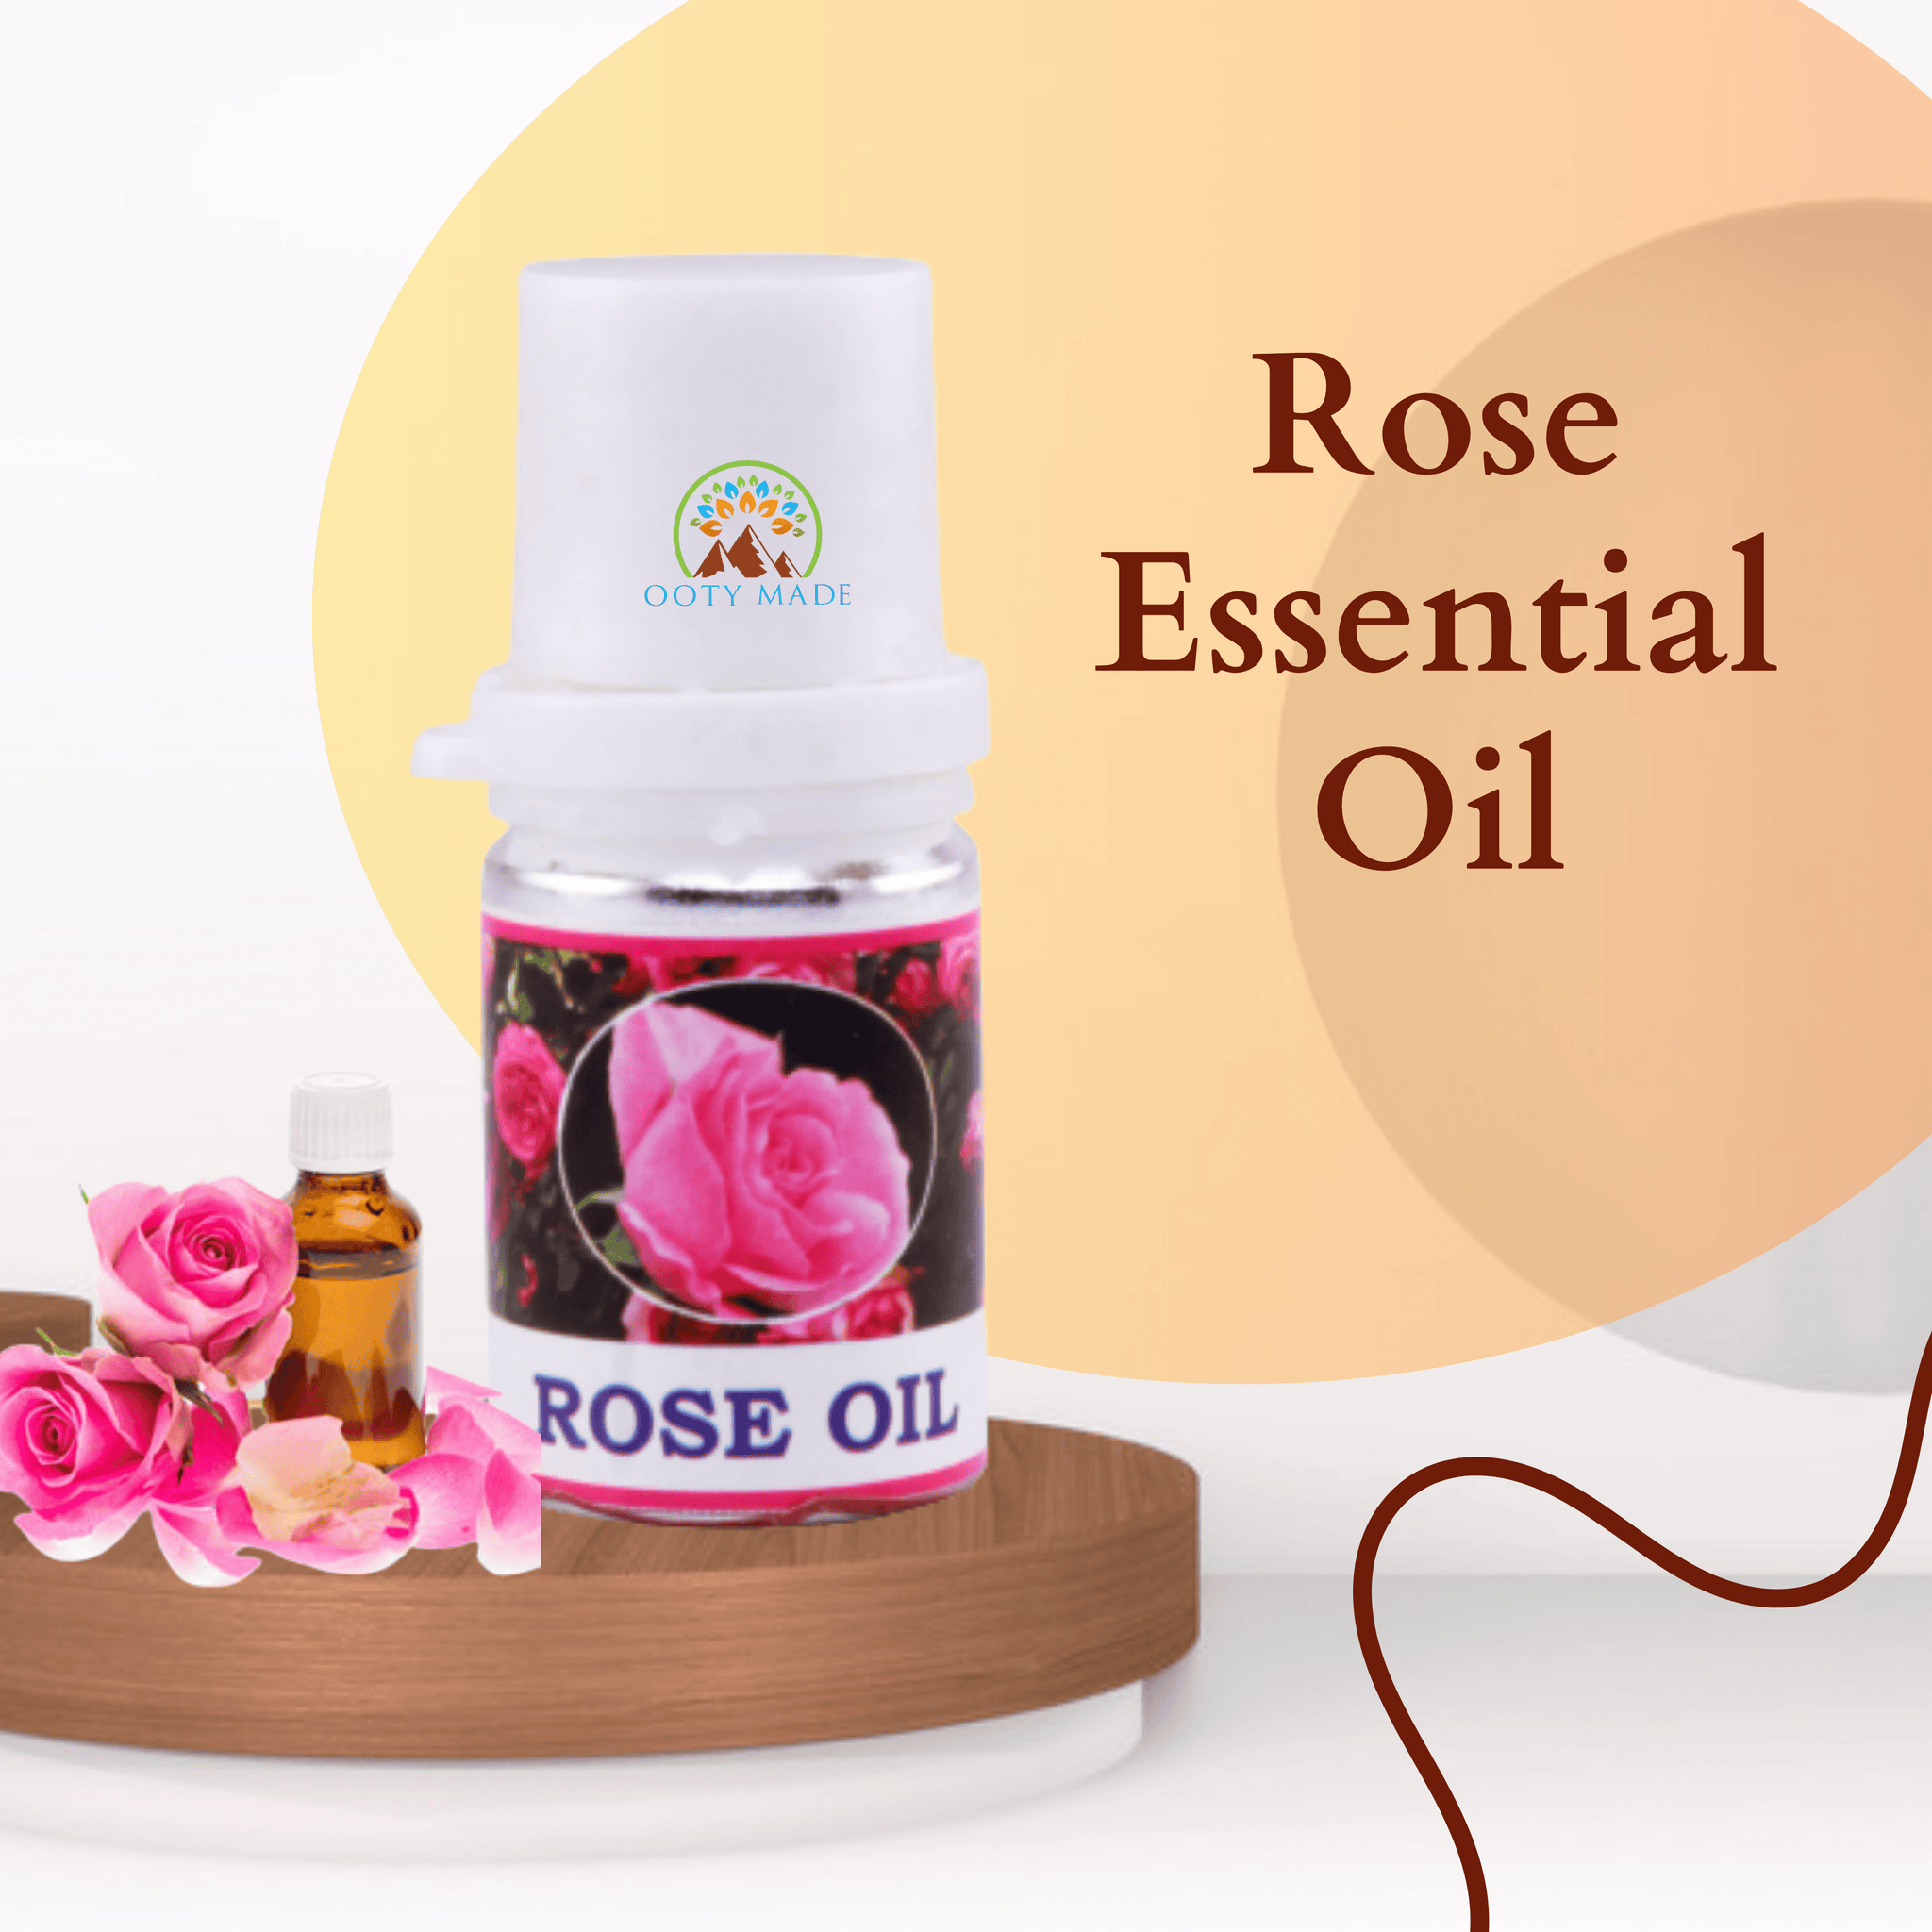 Buy rose essential oil for skin, hair, and aroma diffusers. –